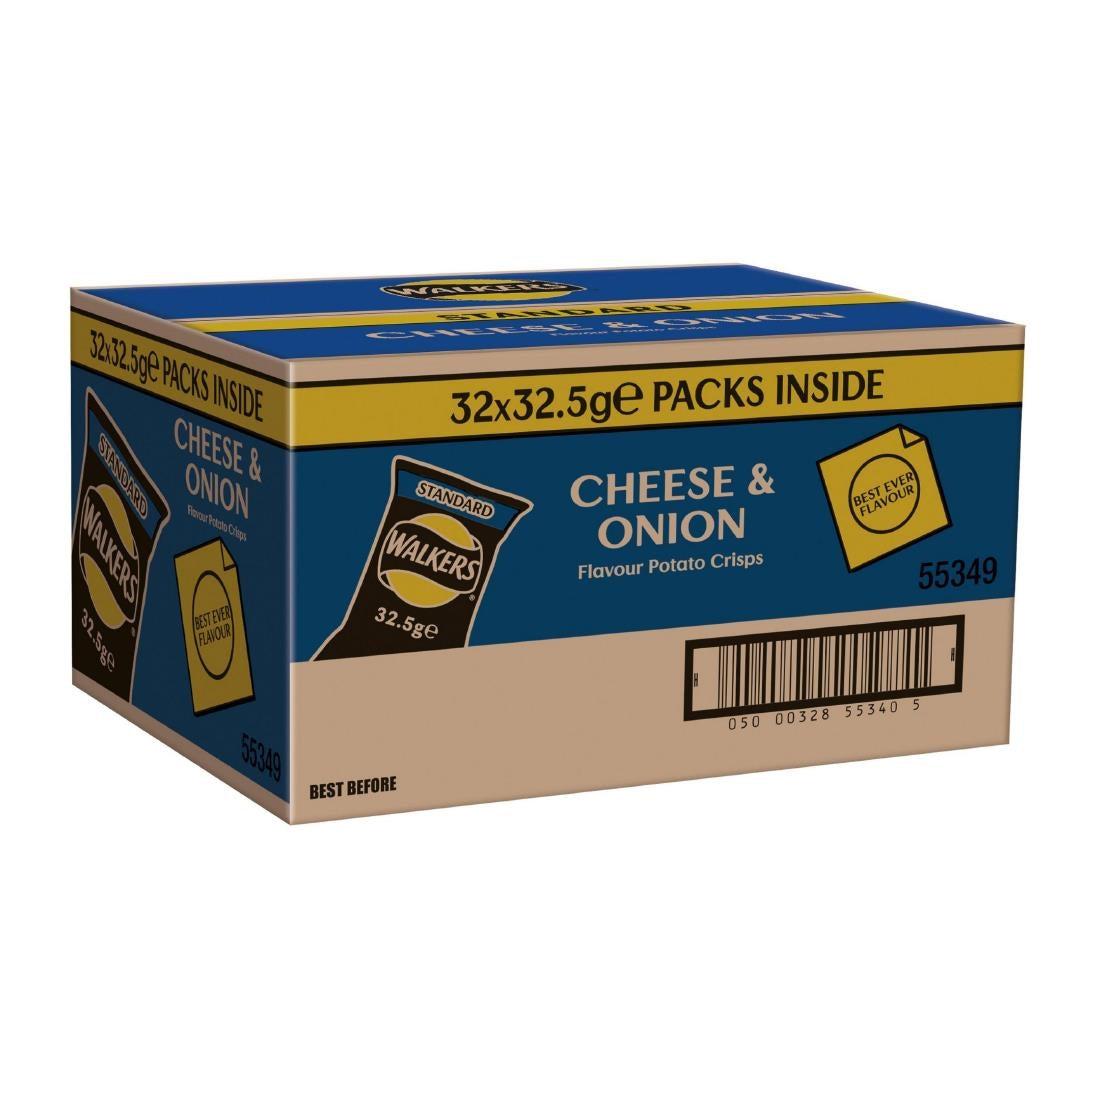 CZ703 Walkers Cheese & Onion Flavour Crisps 32.5g (Pack of 32) JD Catering Equipment Solutions Ltd